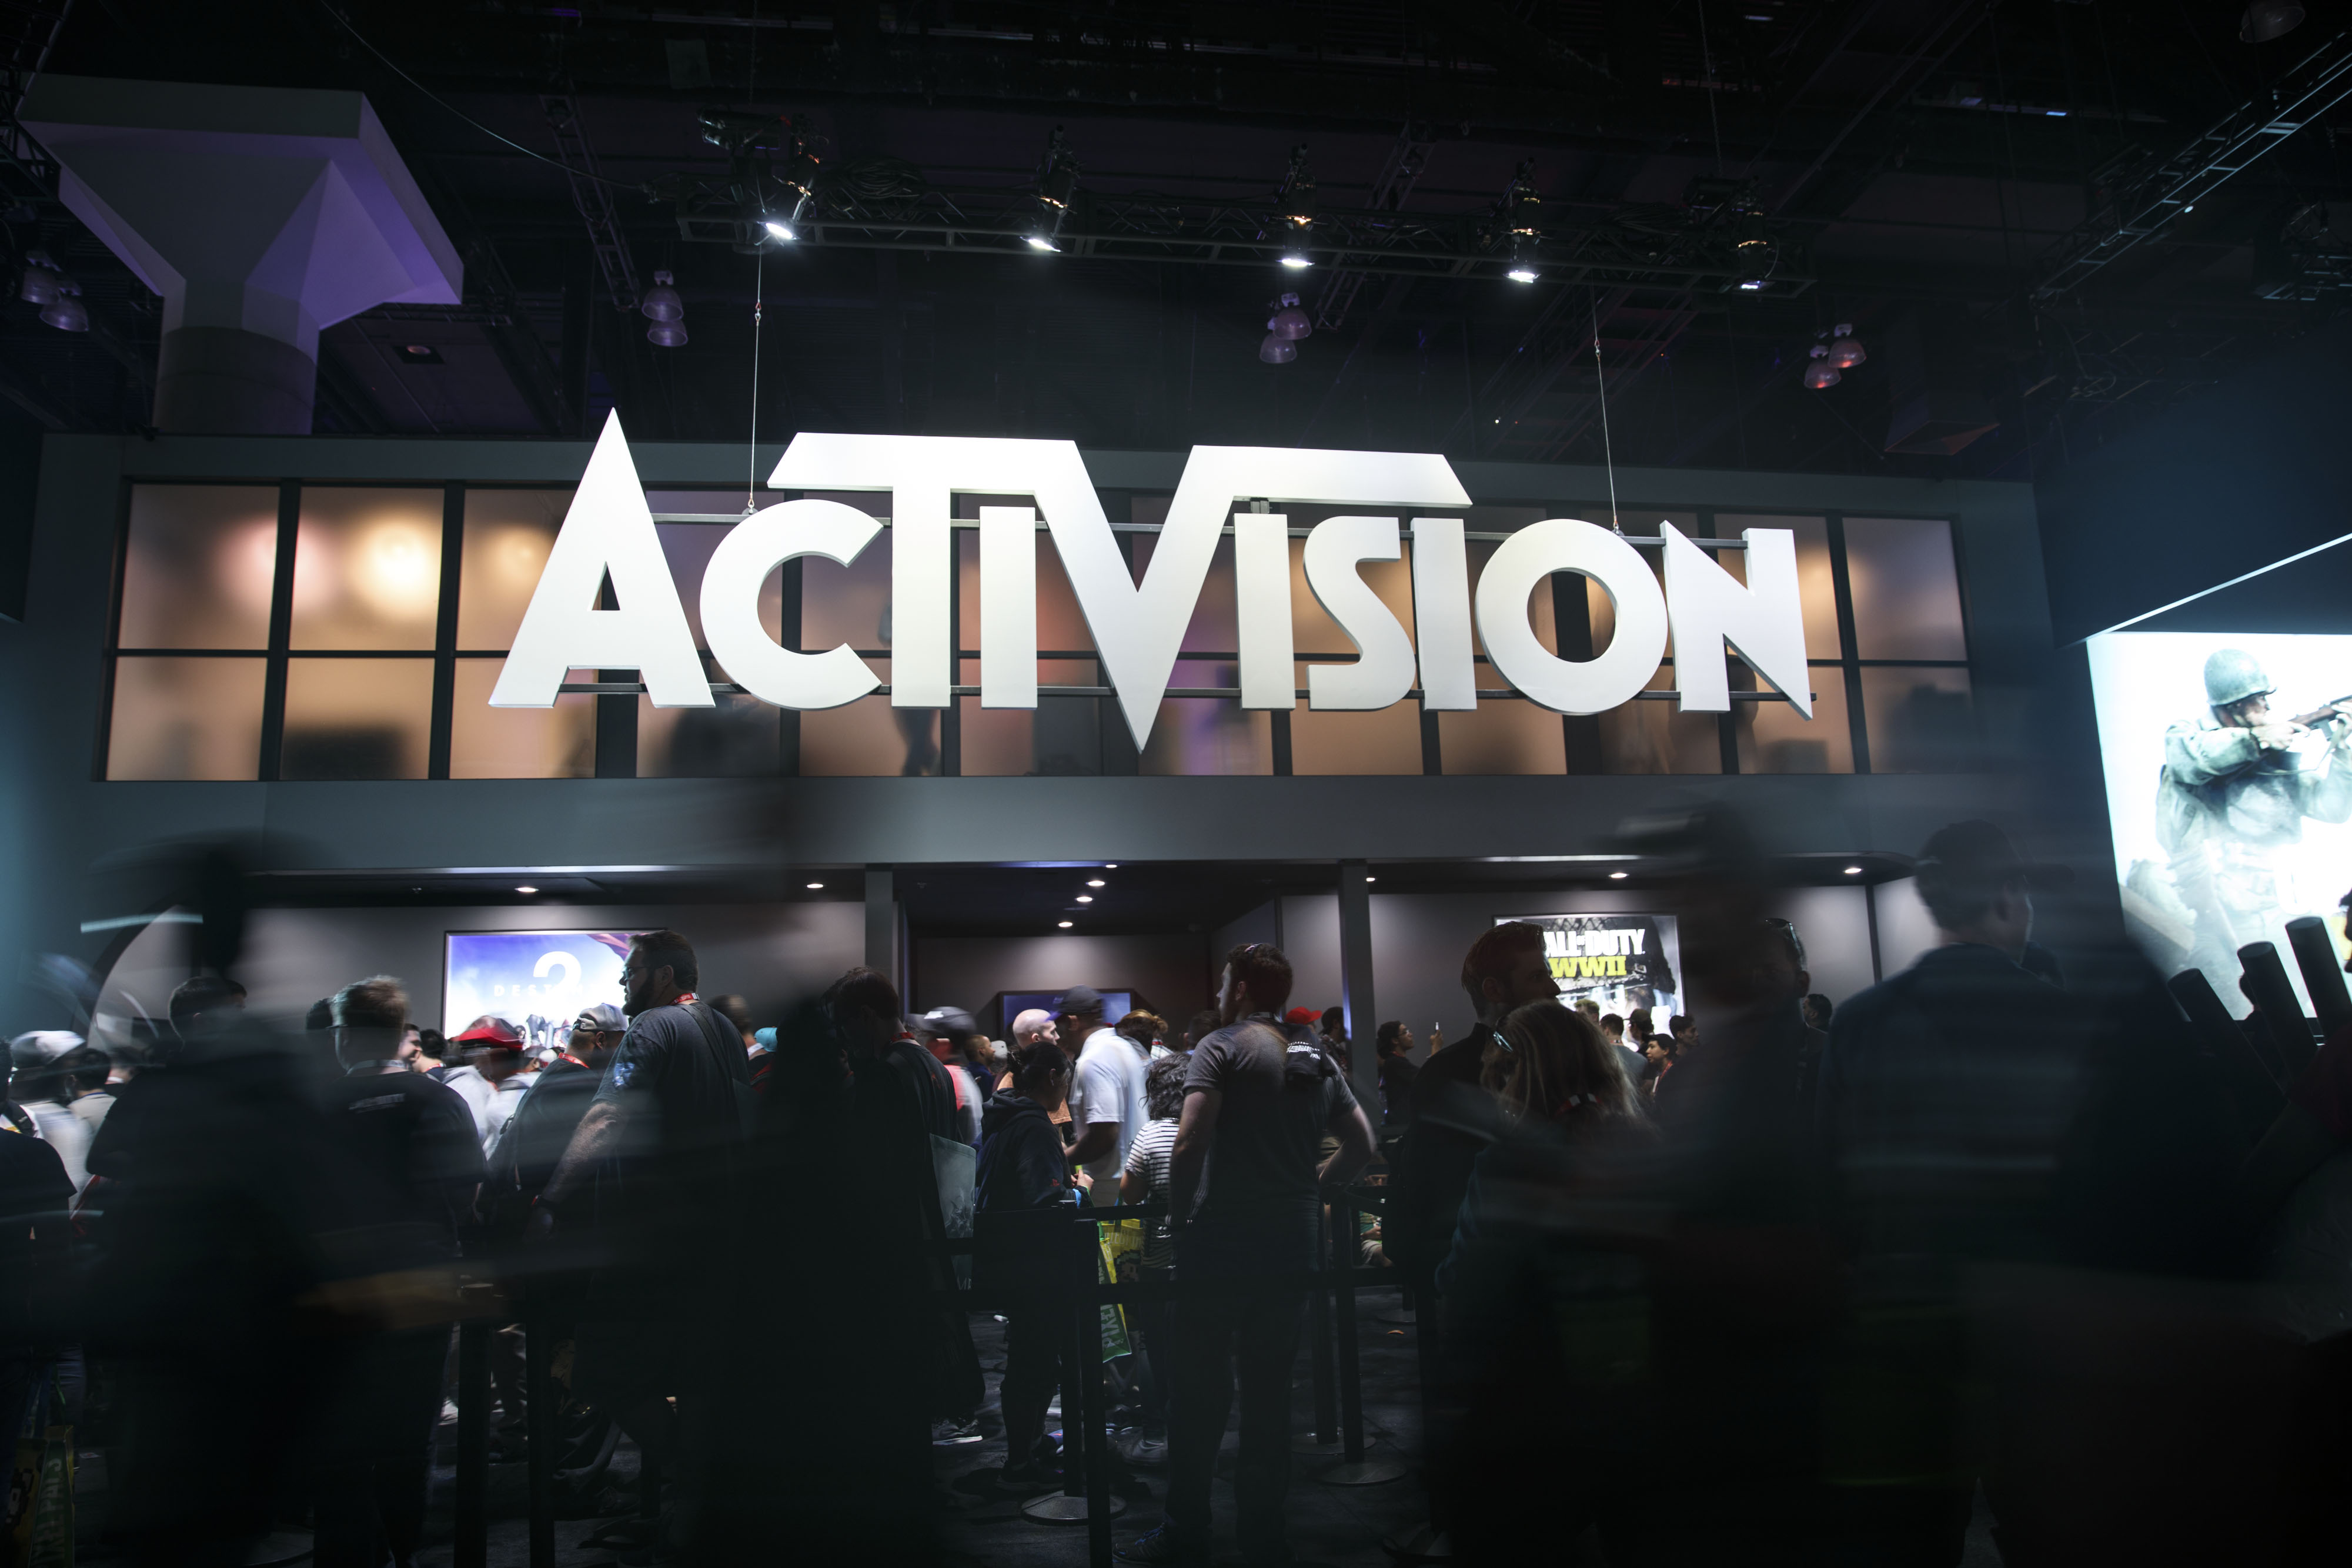 Attendees walk past Activision Blizzard Inc. signage during the E3 Electronic Entertainment Expo in Los Angeles, California, U.S., on Wednesday, June 14, 2017.